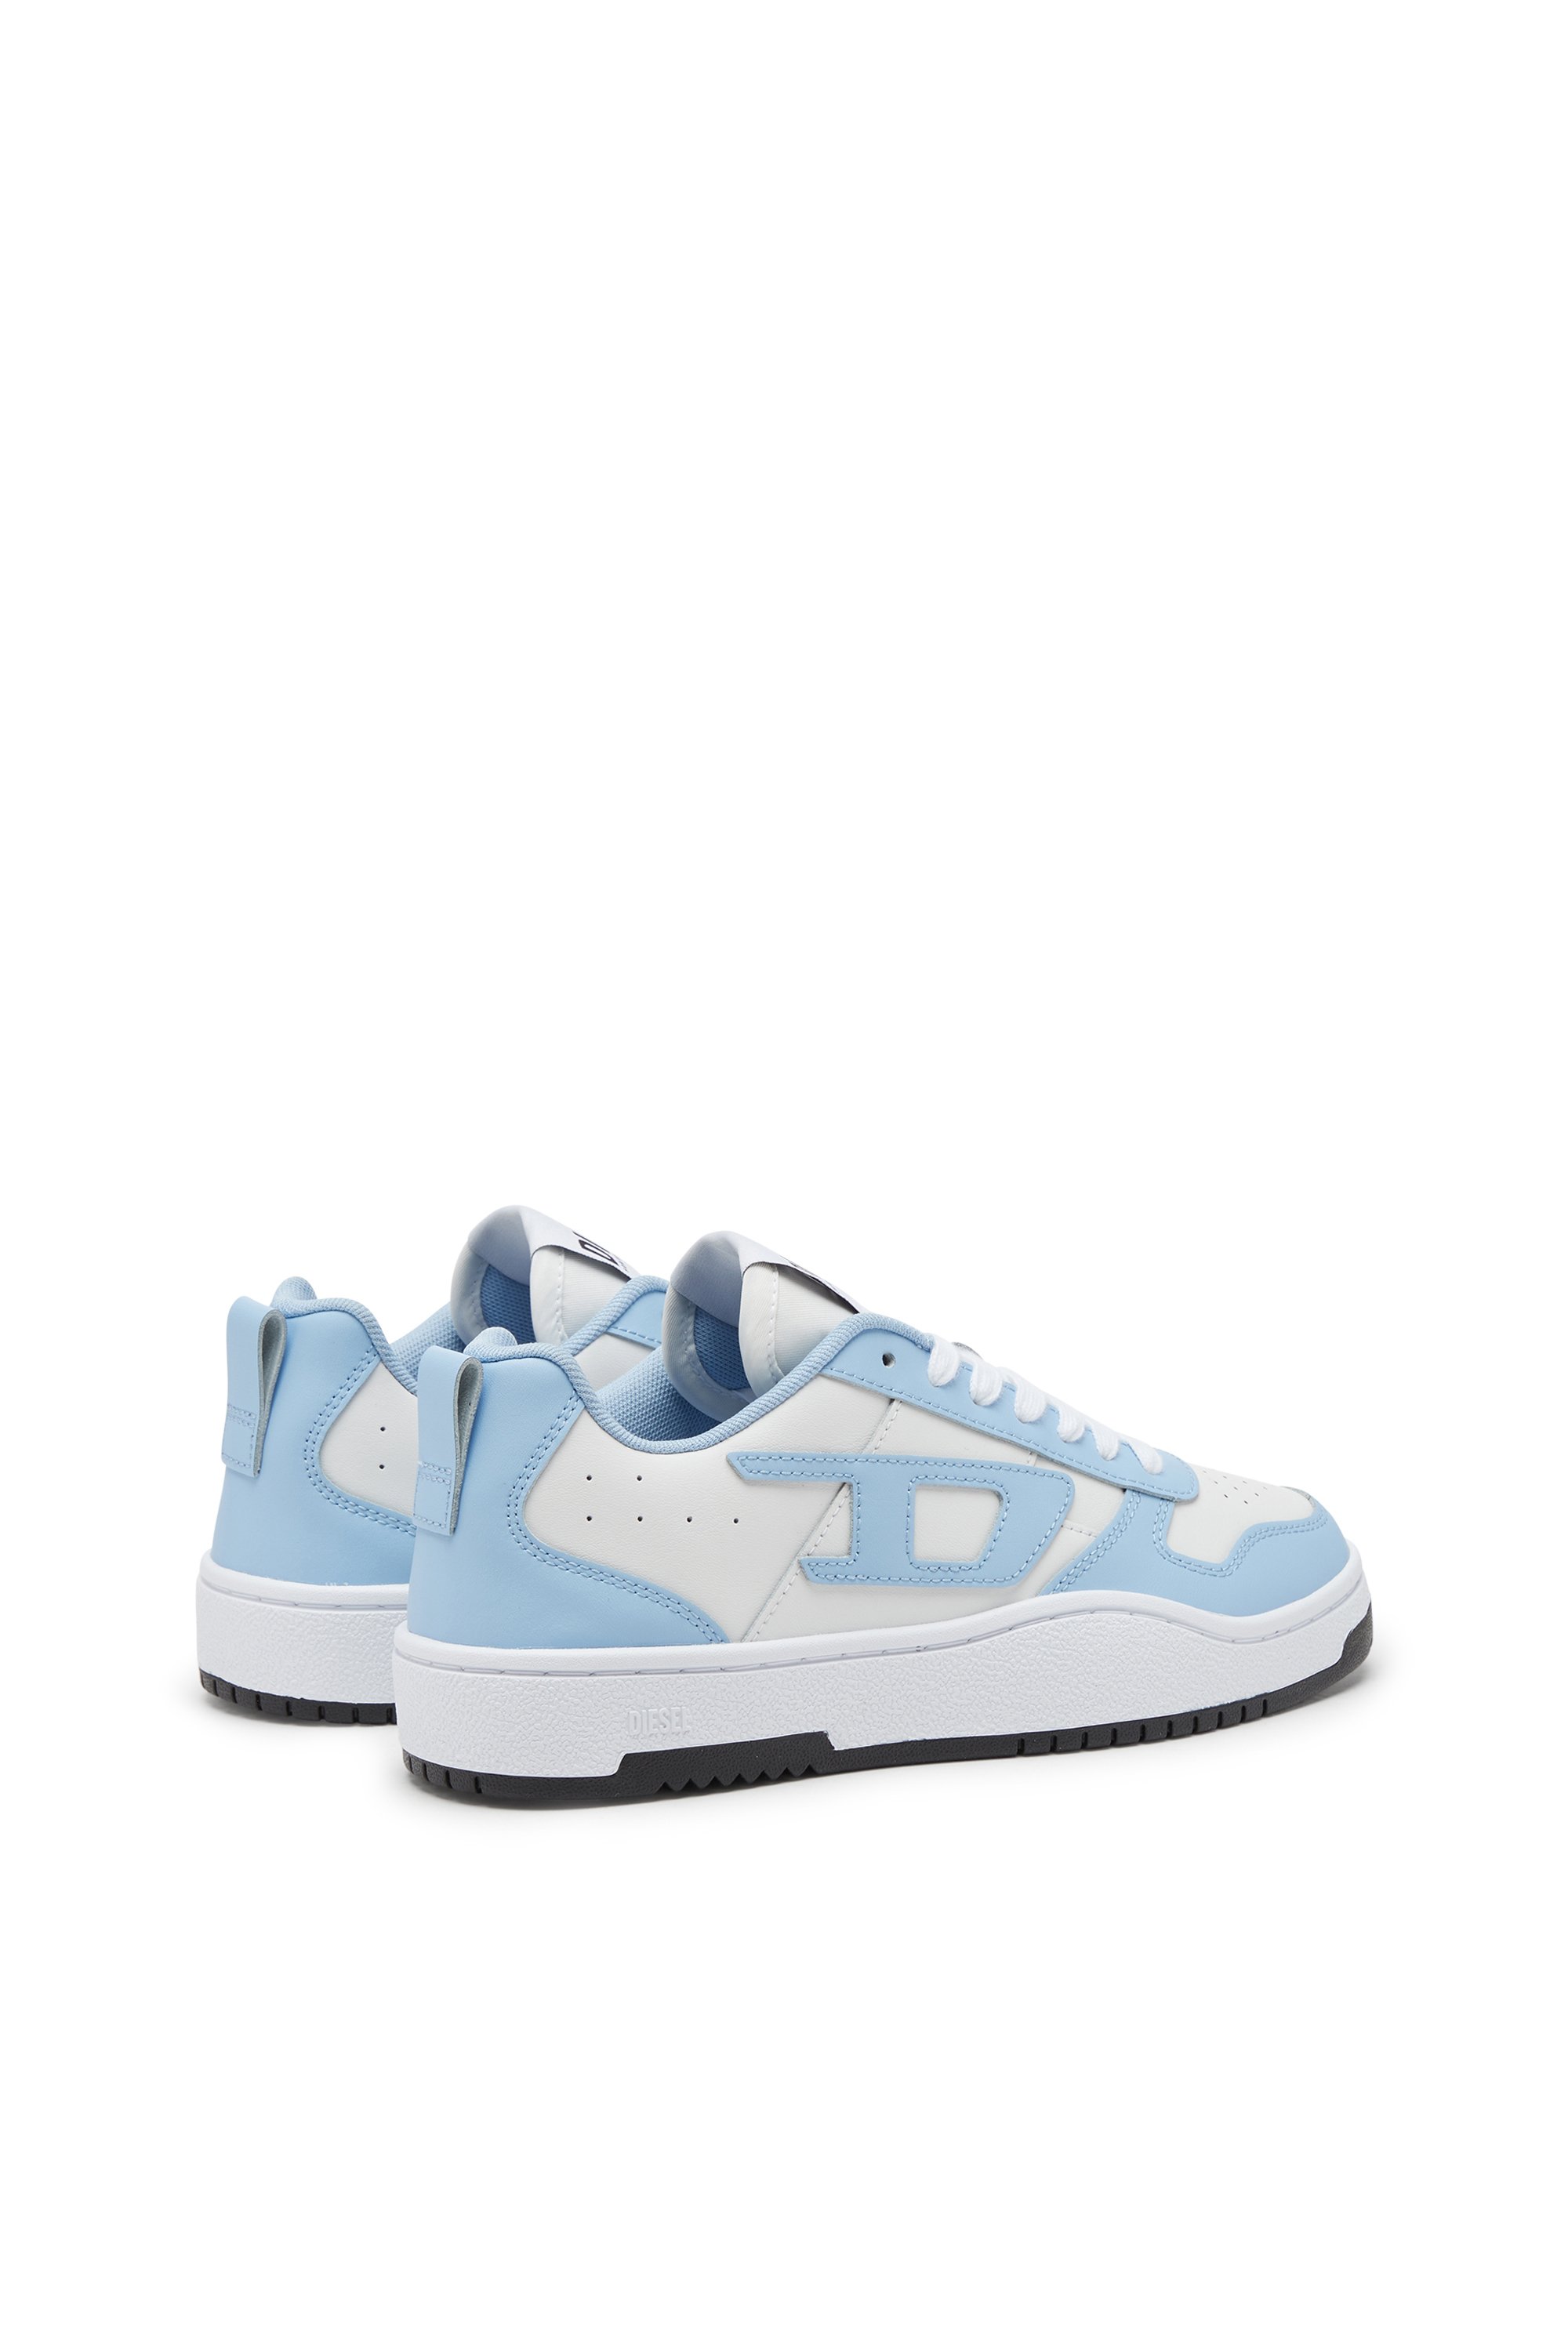 Diesel - S-UKIYO V2 LOW W, Woman S-Ukiyo Low-Low-top sneakers in leather and nylon in Multicolor - Image 3